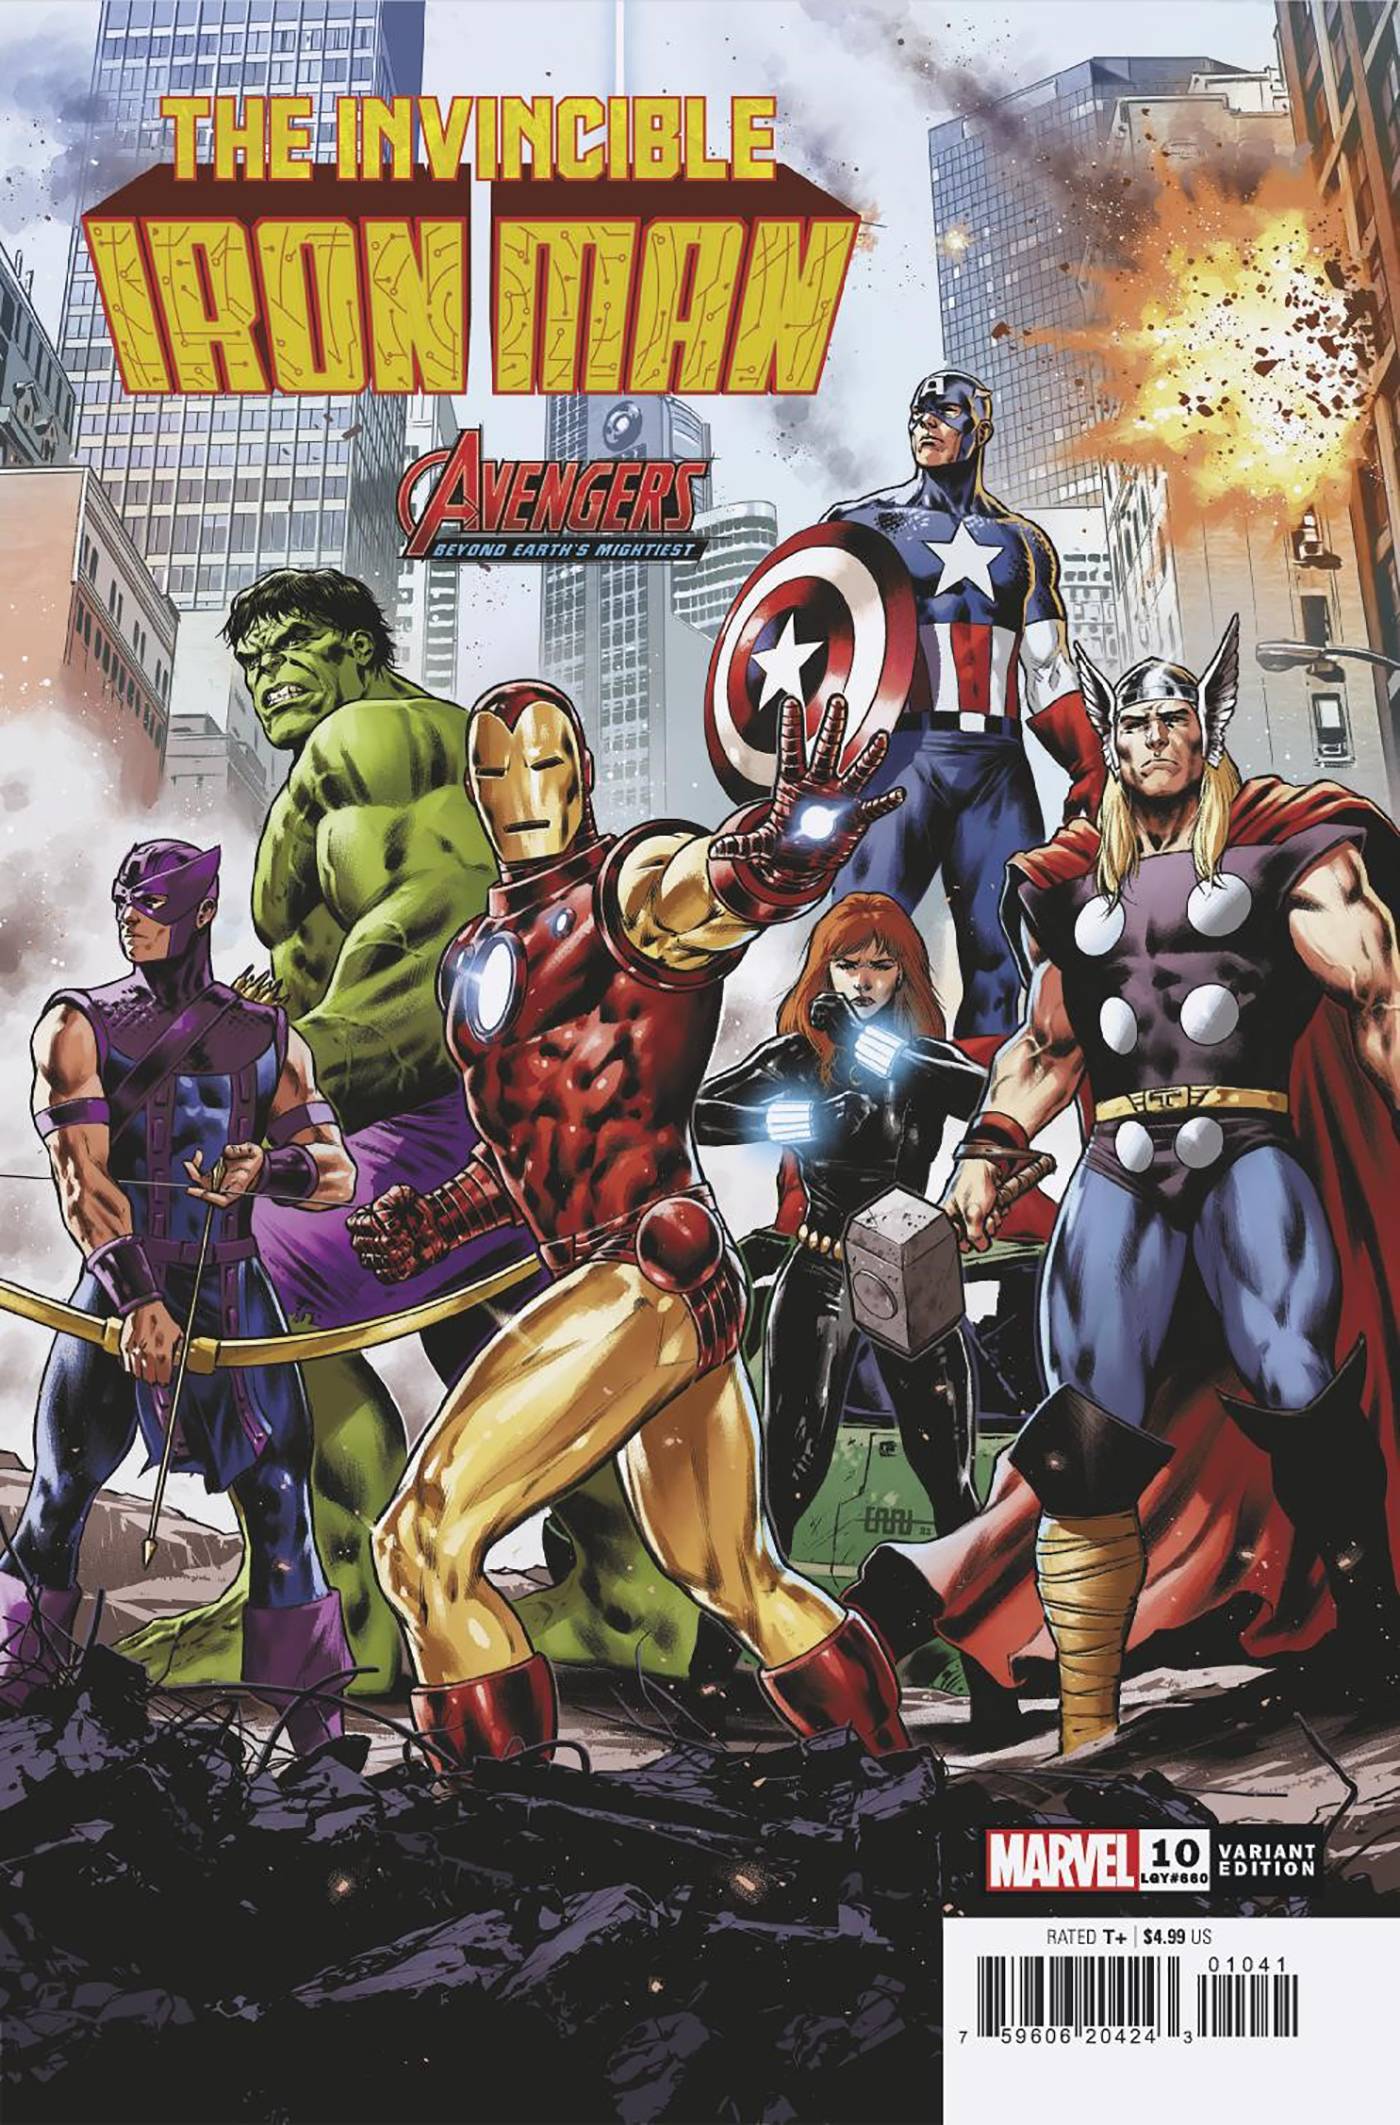 Captain America and The Hulk Join The Avengers 60th Anniversary